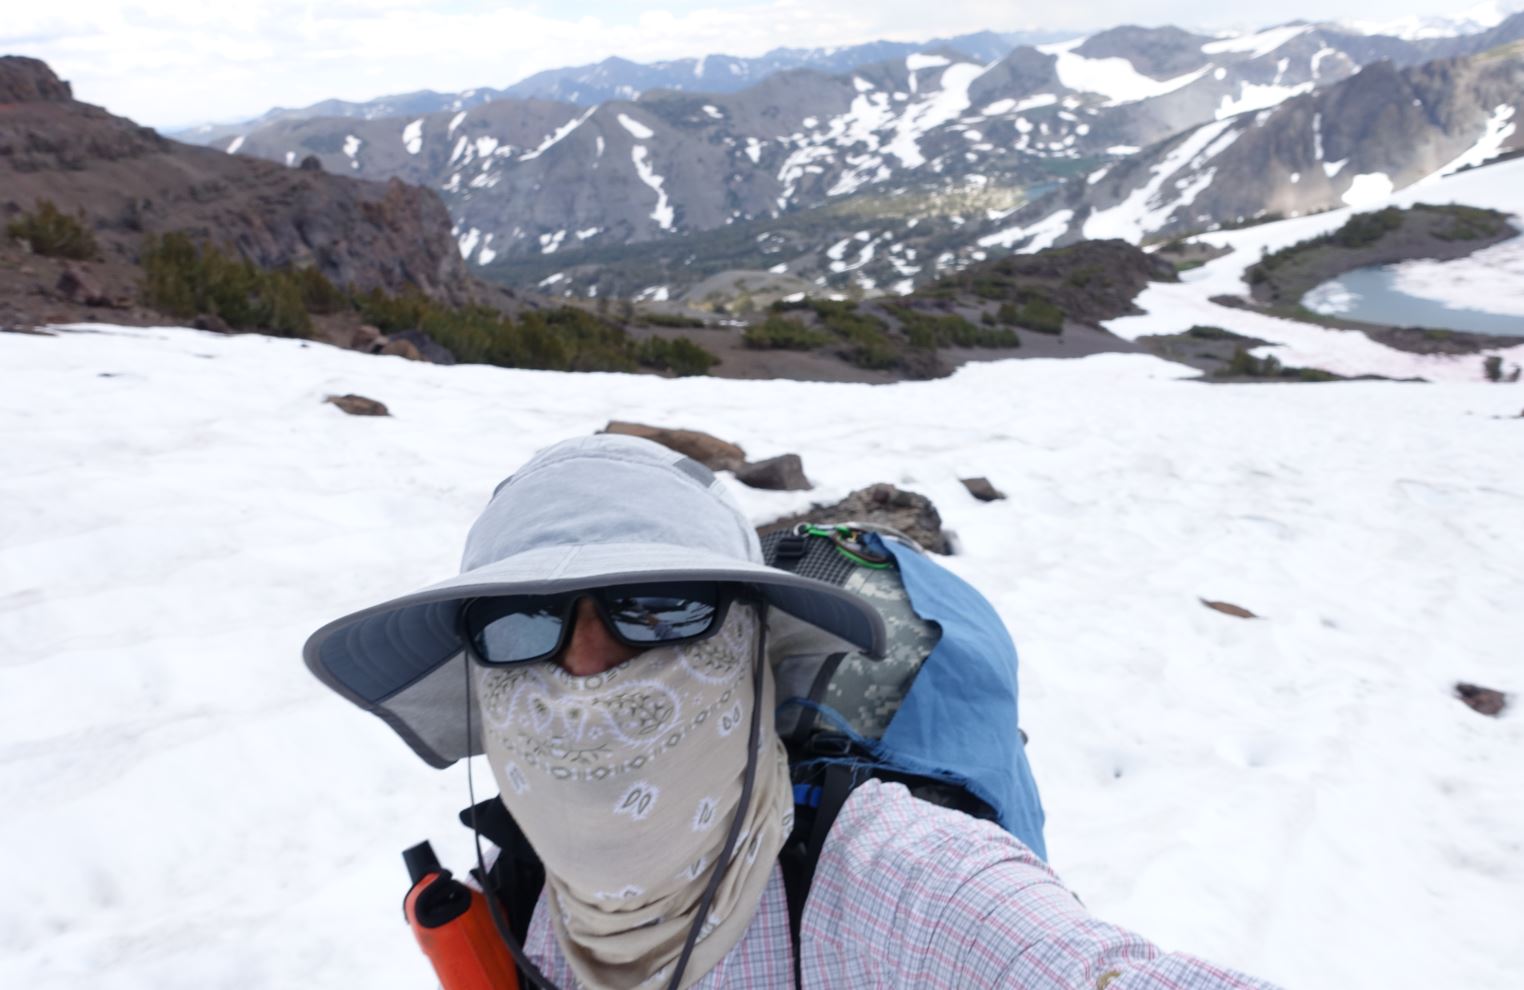 Sunday Afternoons Adventure vs. Ultra-Adventure? - Backpacking Light